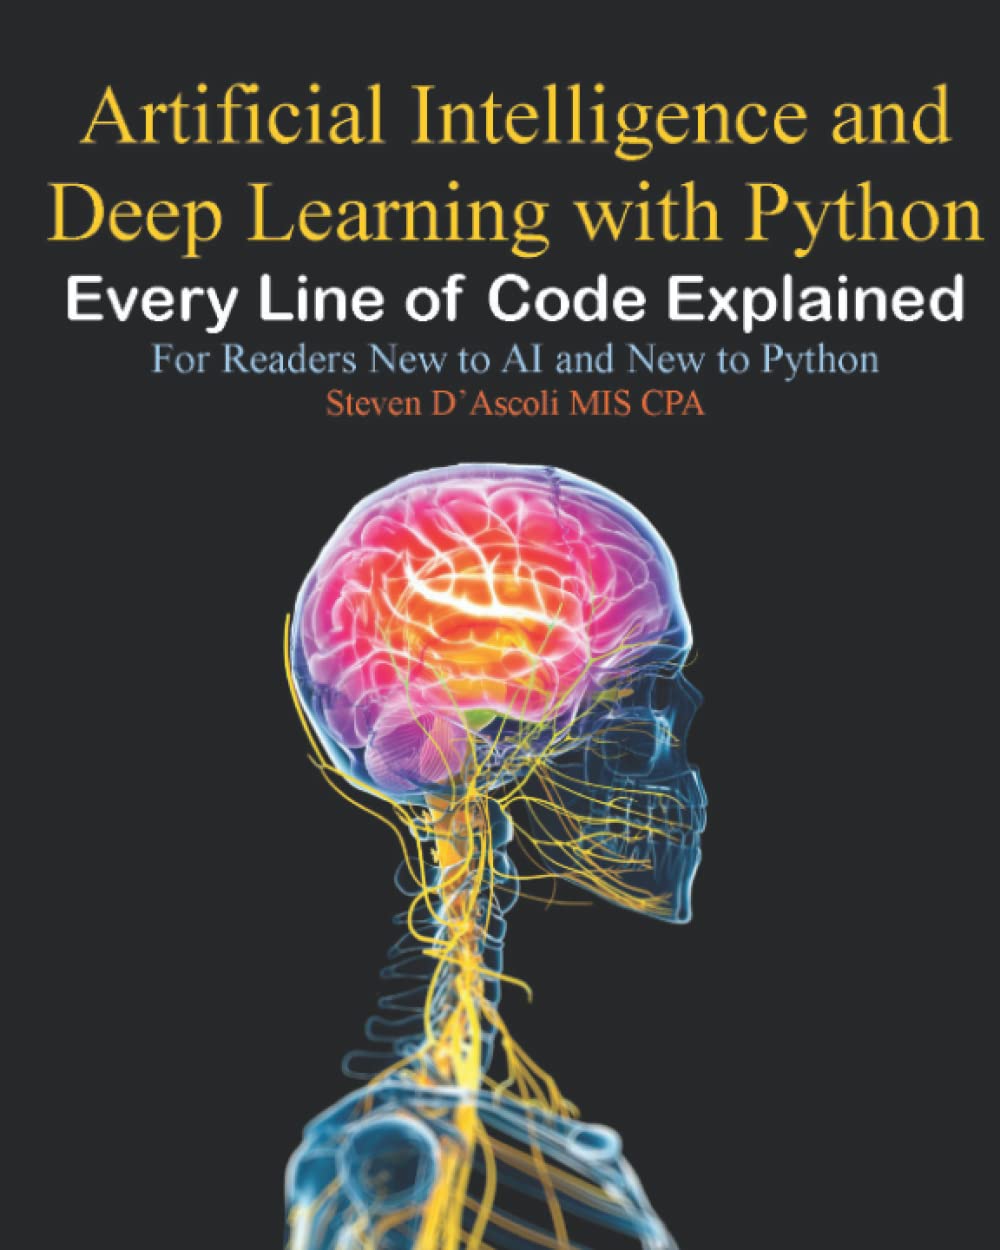 Artificial Intelligence and Deep Learning with Python: Every Line of Code Explained For Readers New to AI and New to Python (Paperback)